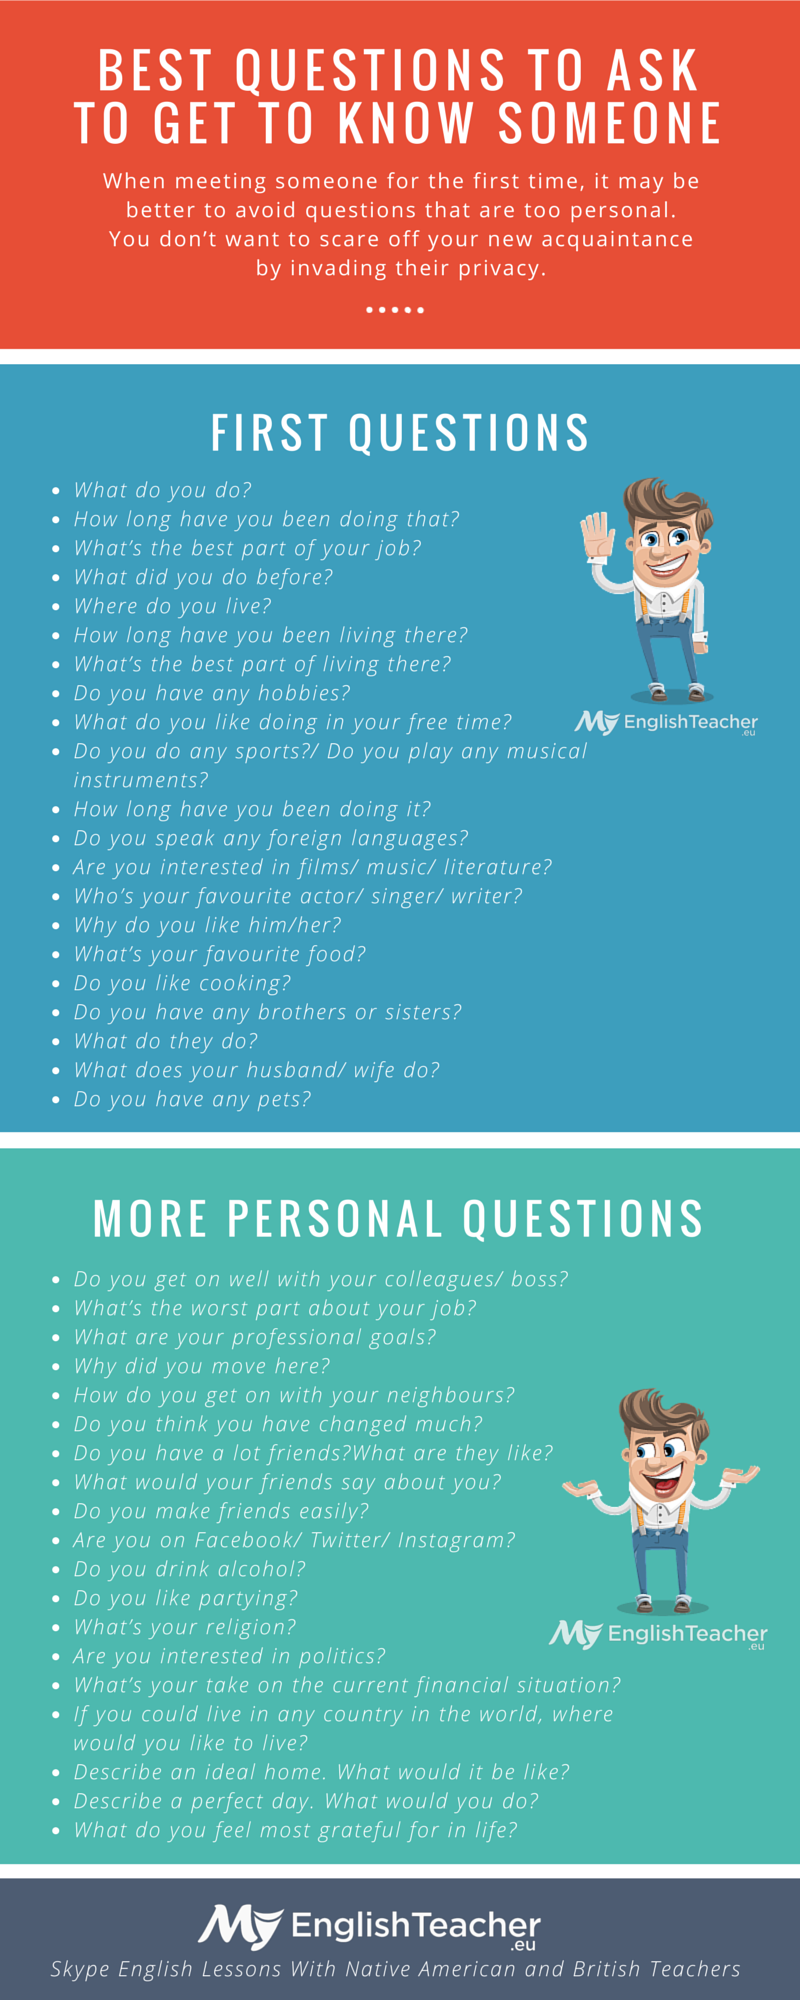 Best questions to ask to get to know someone!